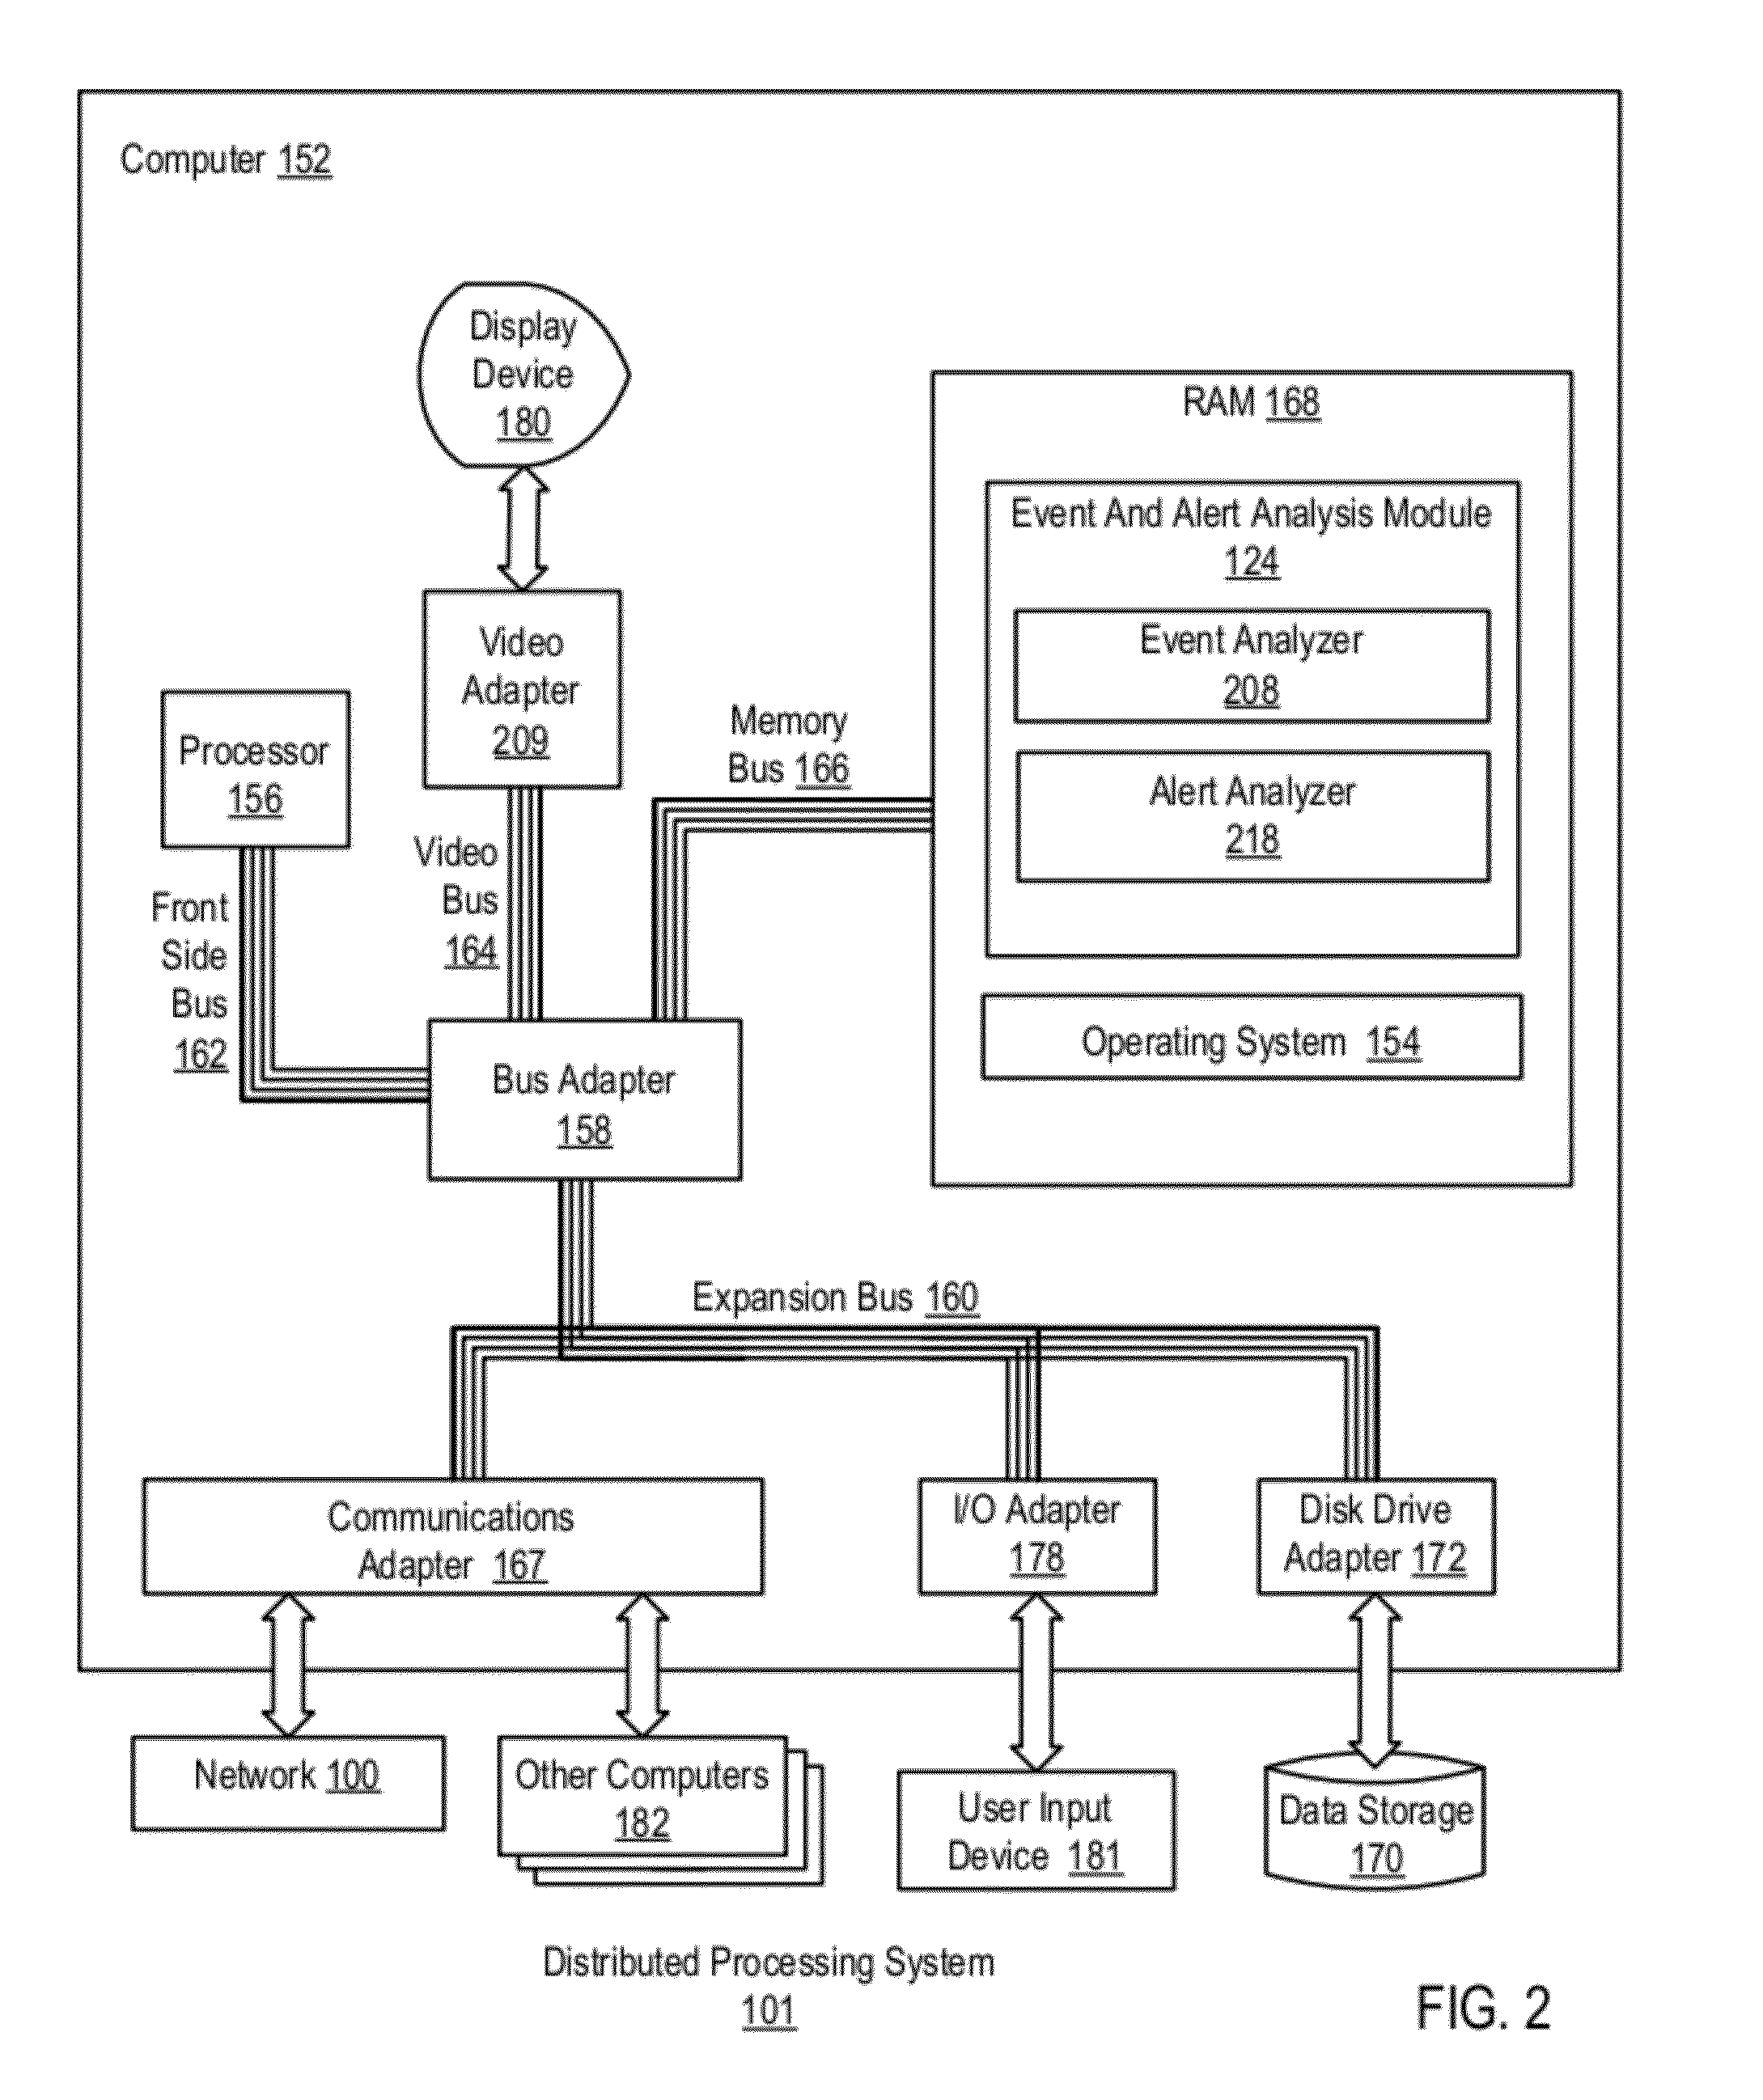 Configurable Alert Delivery In A Distributed Processing System